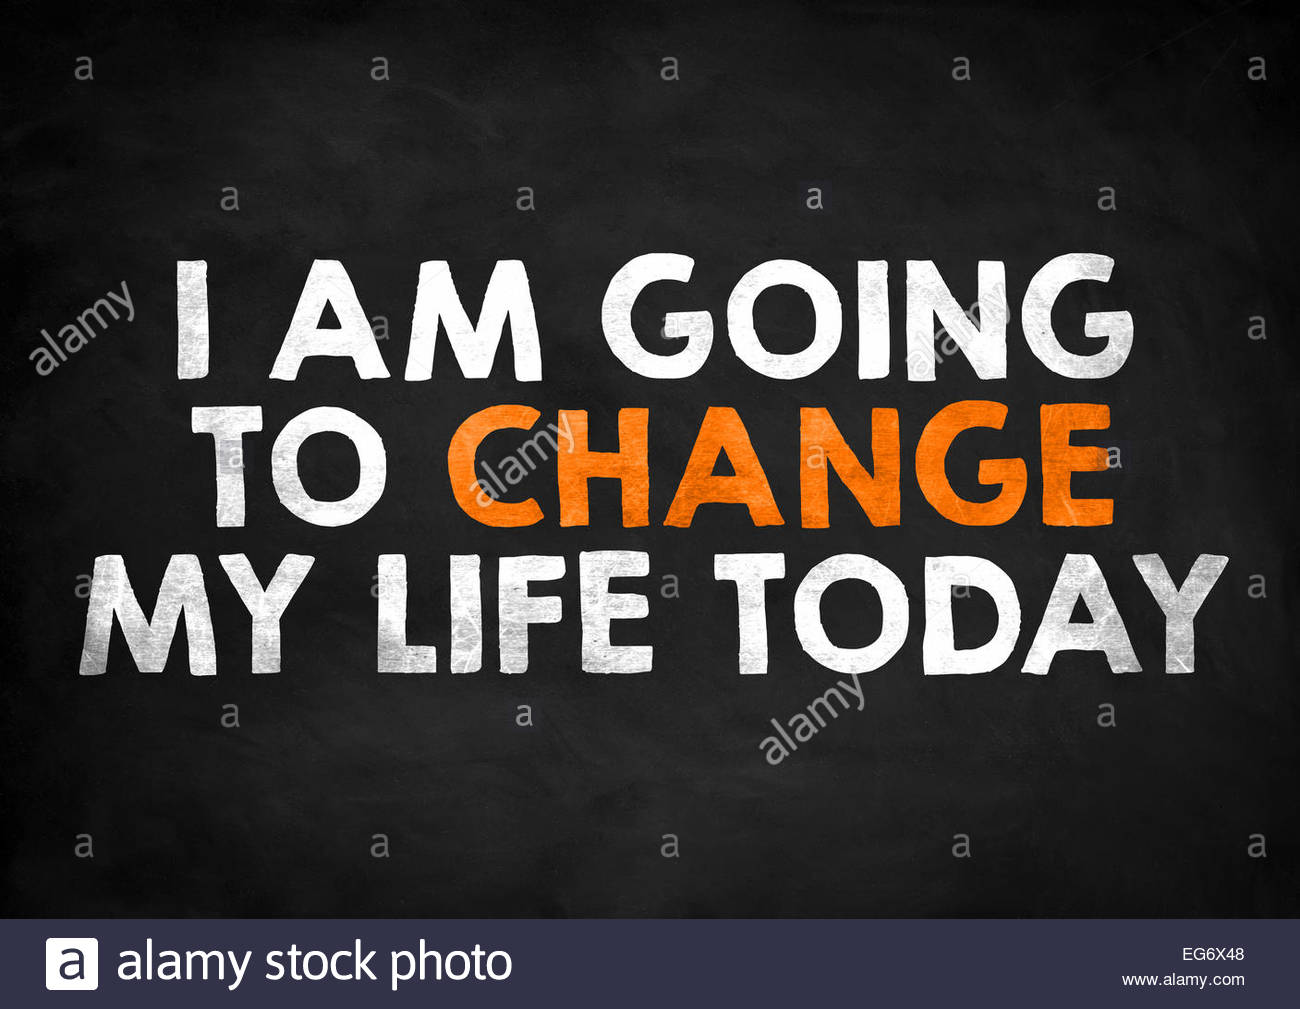 I Am Going To Change My Life Today Stock Photo 78828184 Alamy